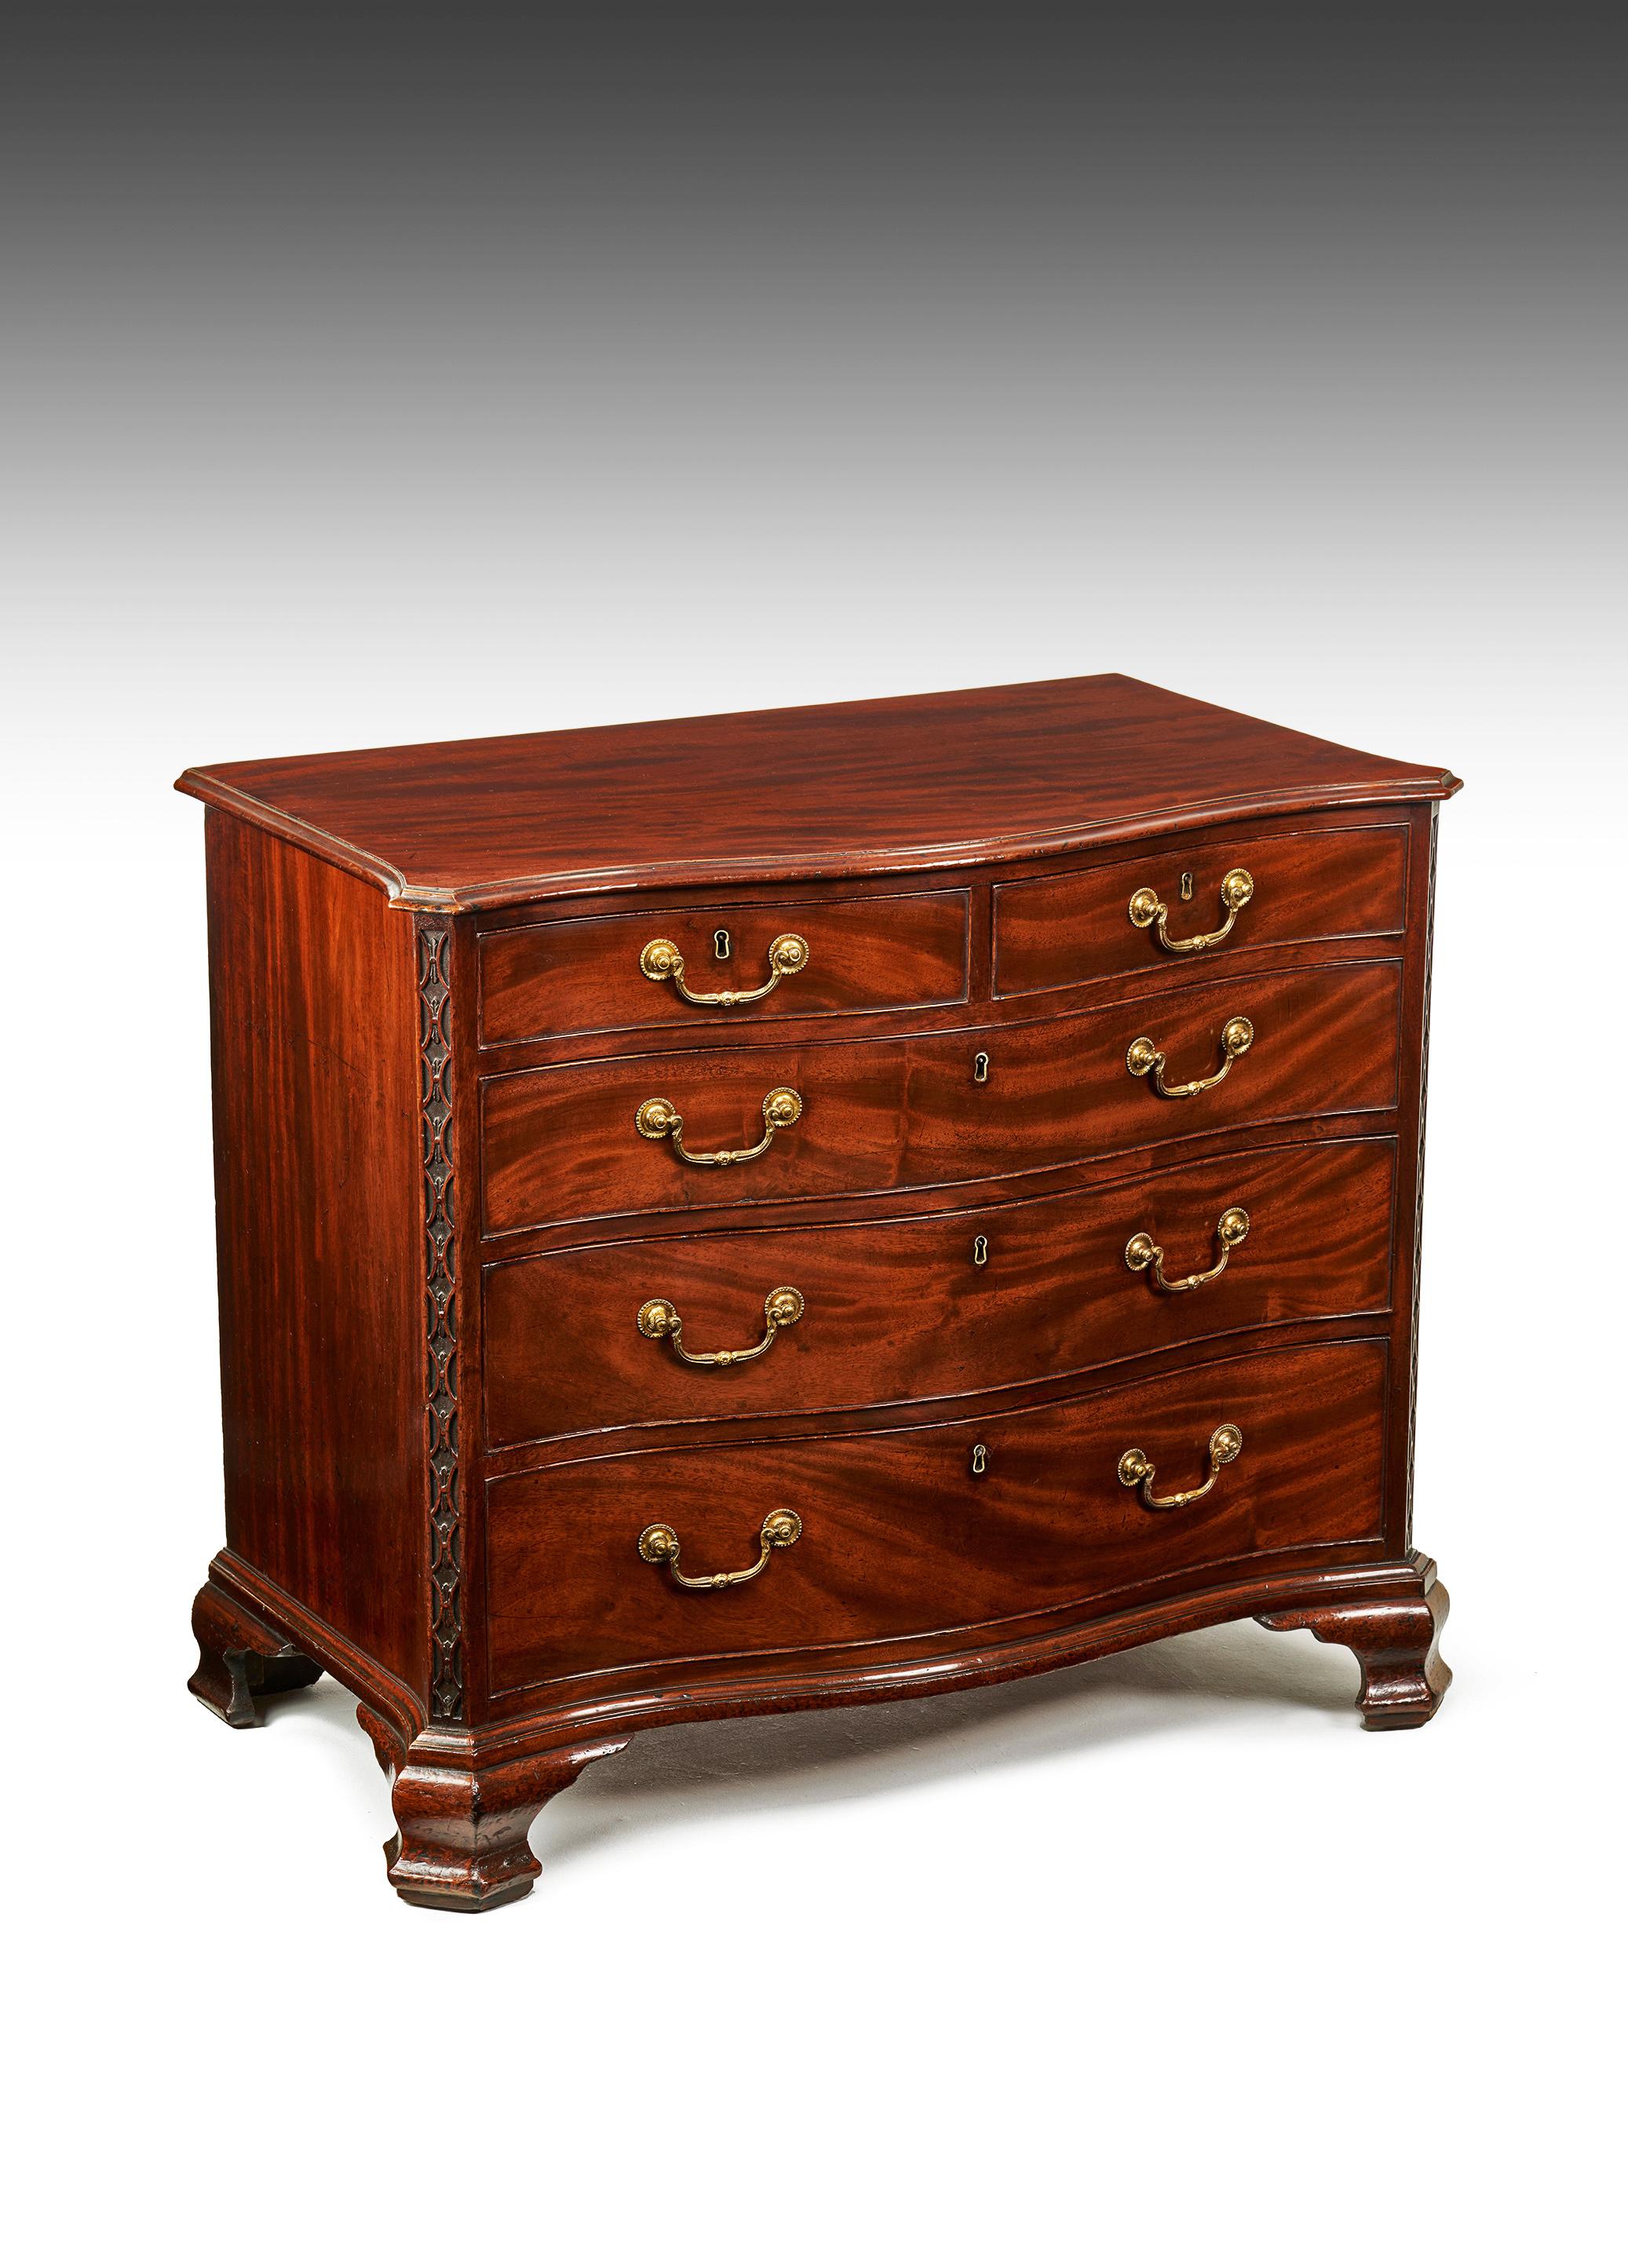 Fine antique Chippendale period 18th century serpentine mahogany chest of drawers of excellent proportions, retaining its original OG bracket feet and ornate gilt brass handles.

English, Circa 1760-70, George III.

Of a very desirable size this